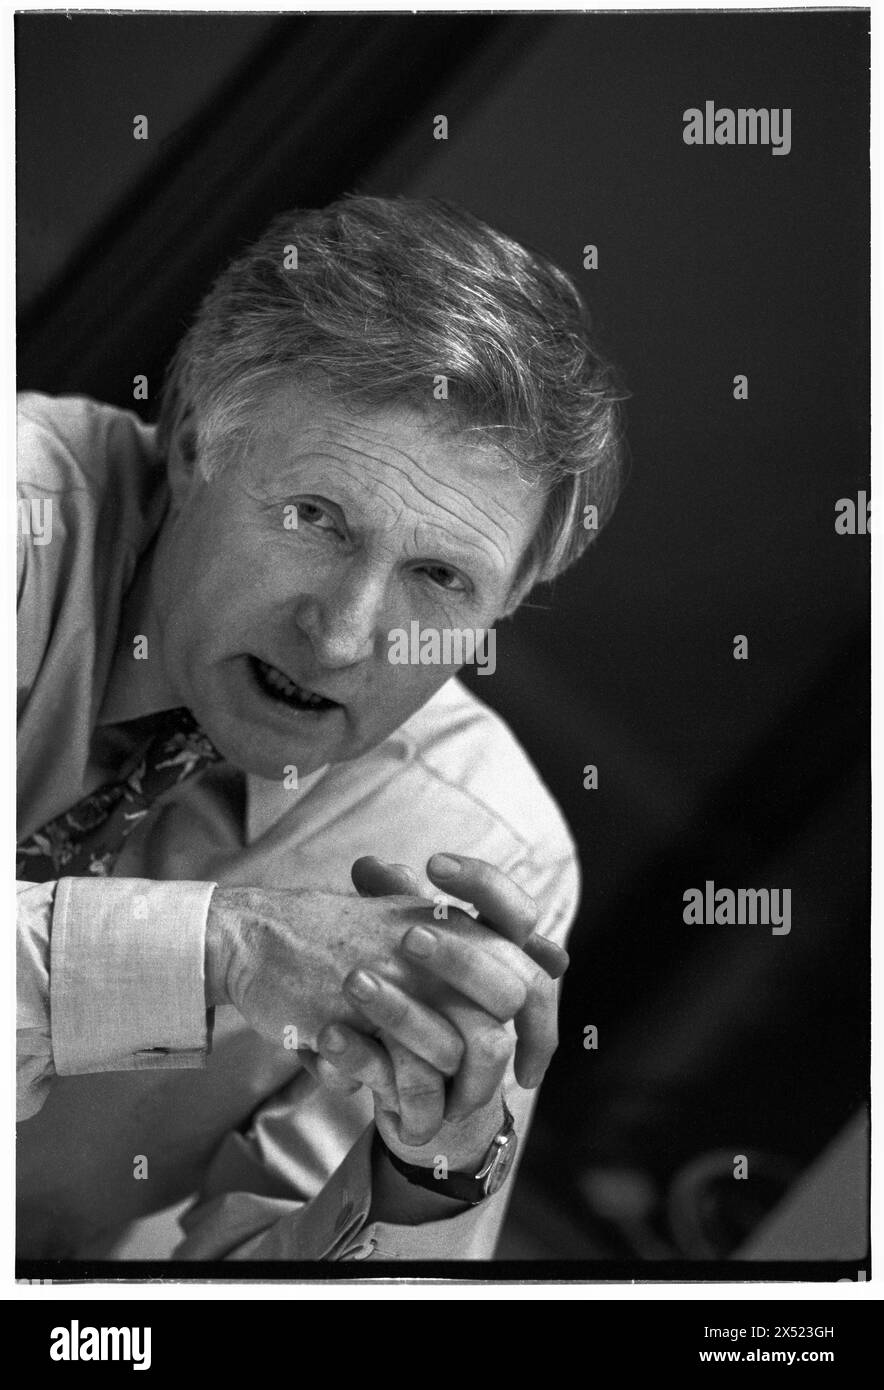 DAVID DIMBLEBY, BACKSTAGE, QUESTION TIME, 1994: A portriat of TV presenter and news anchor David Dimbleby just after he took over as the new presenter of Question Time backstage after the show at ITV Studios, Culverhouse Cross in Cardiff, Wales, UK on 17 March 1994. Photo: Rob Watkins. Stock Photo